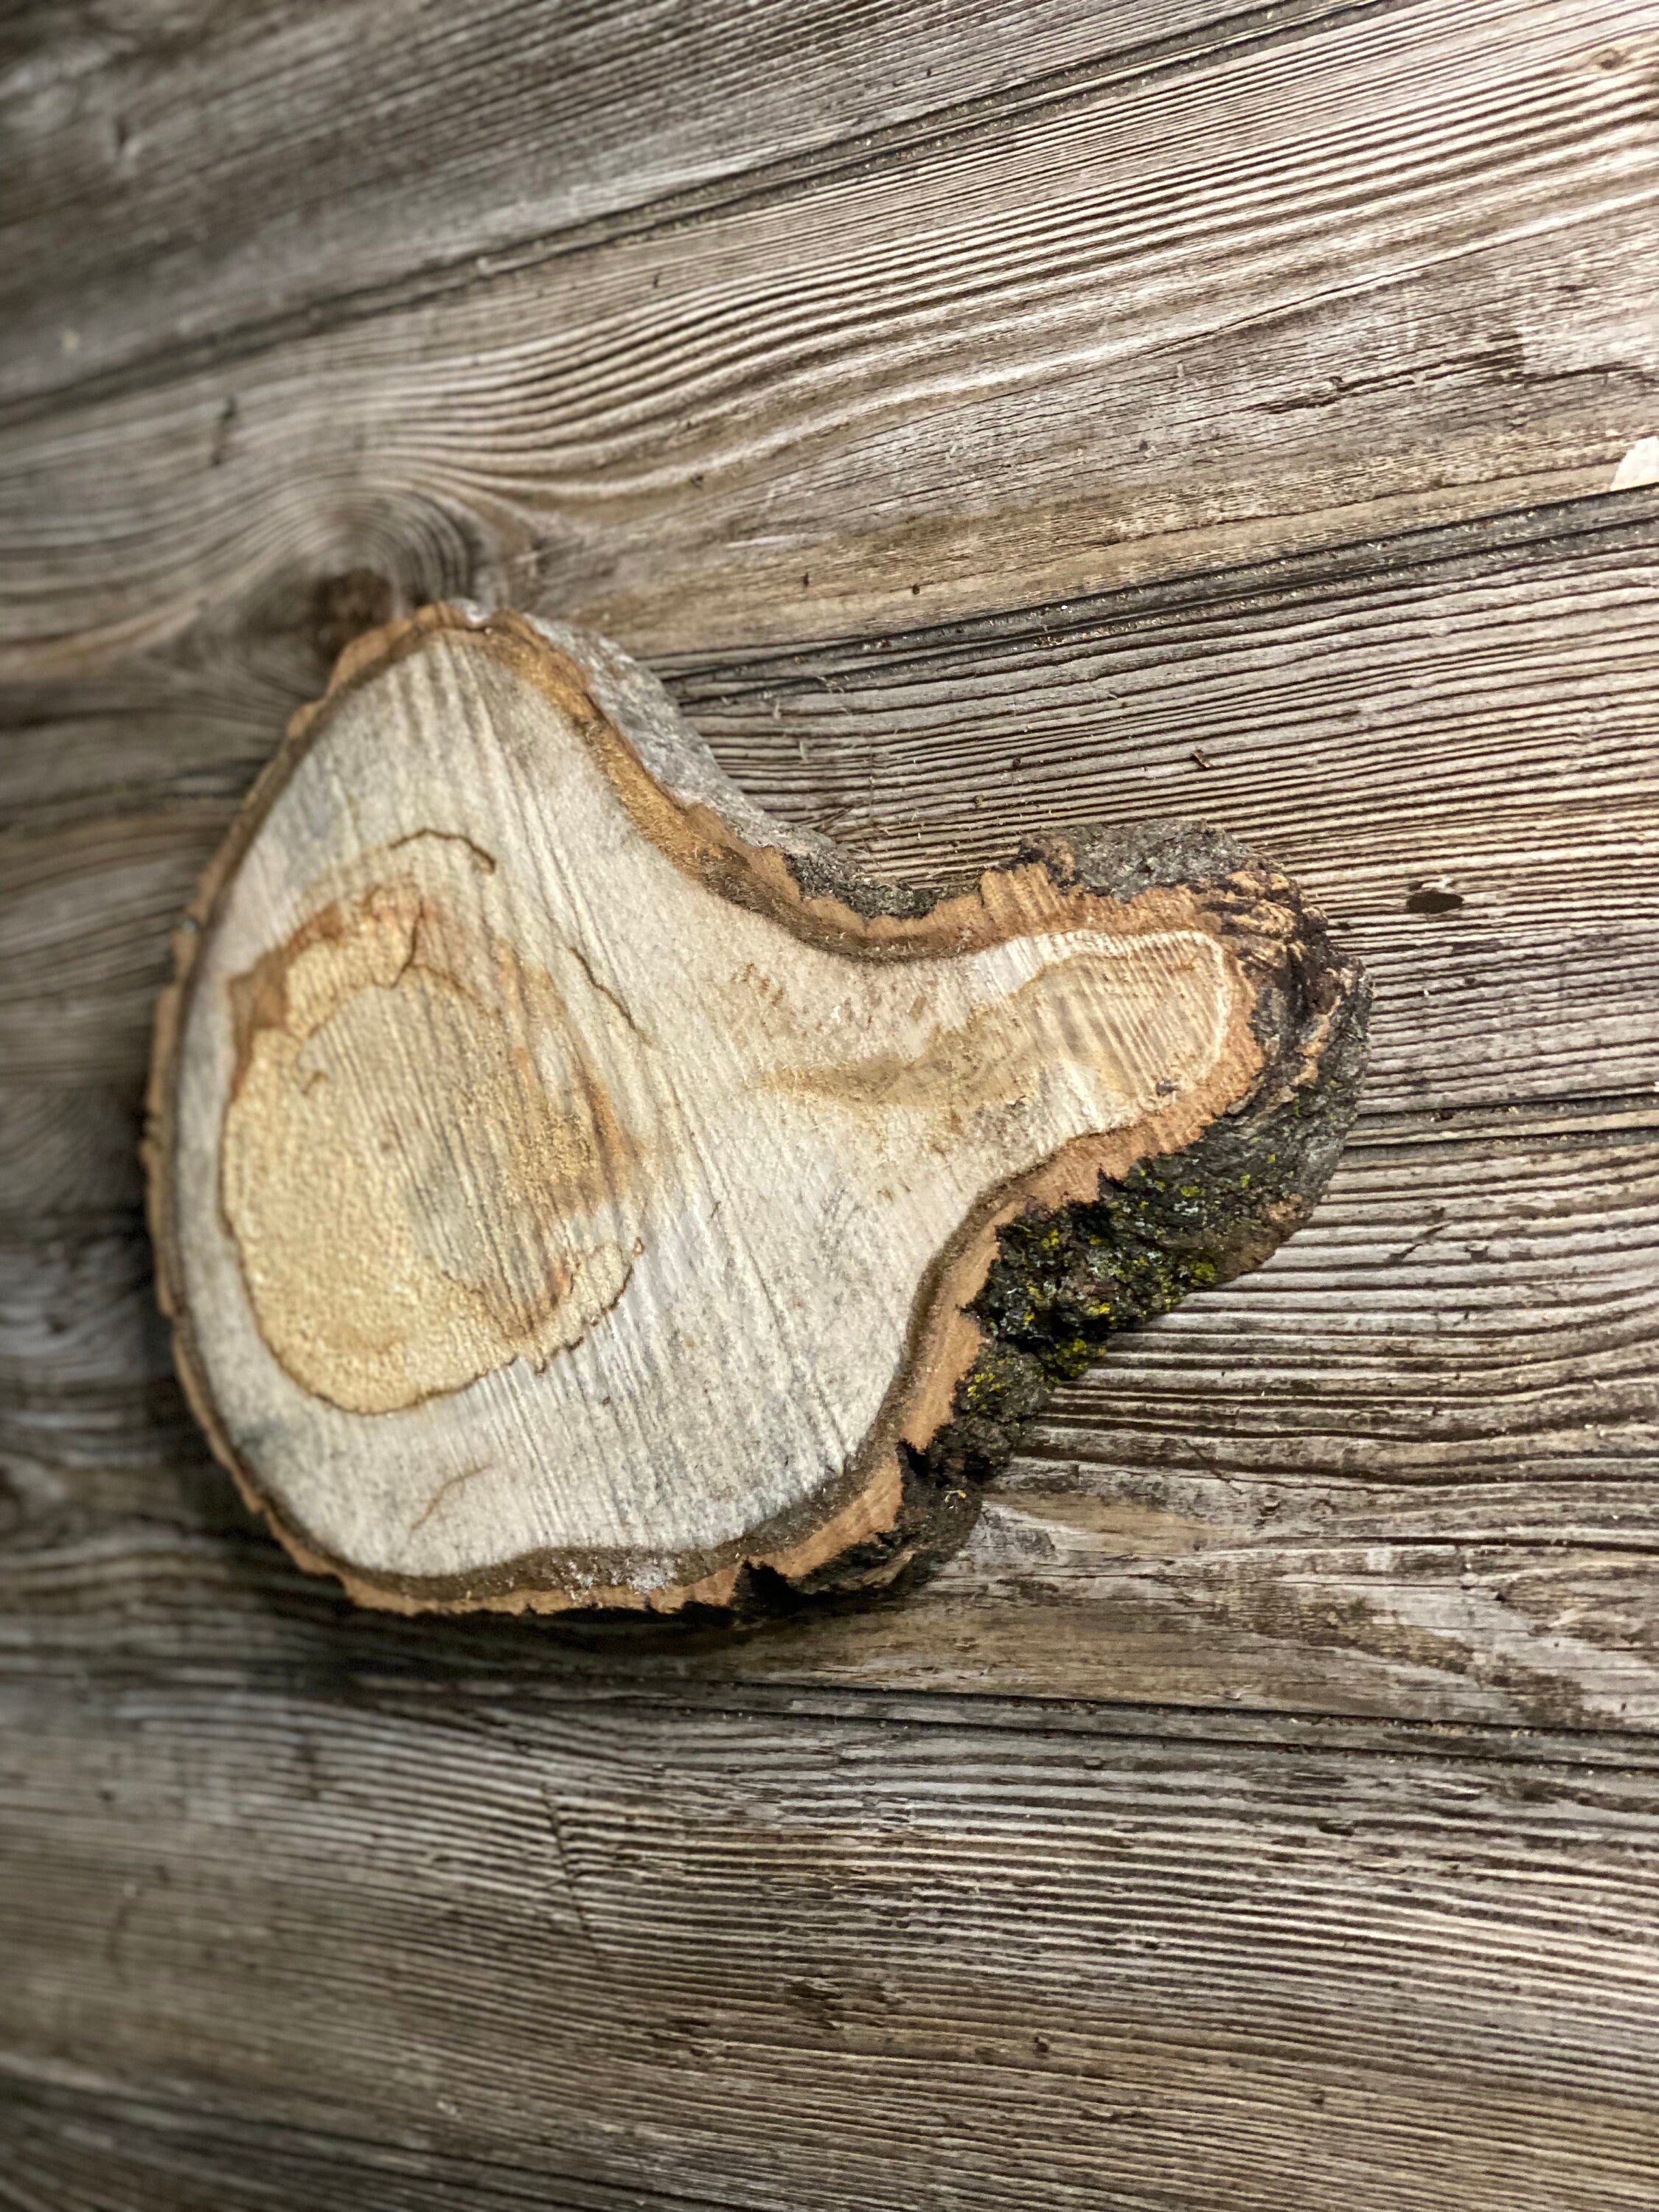 Aspen Burl Slice, Approximately 11 Inches Long by 8 Inches Wide and 1 Inch Thick